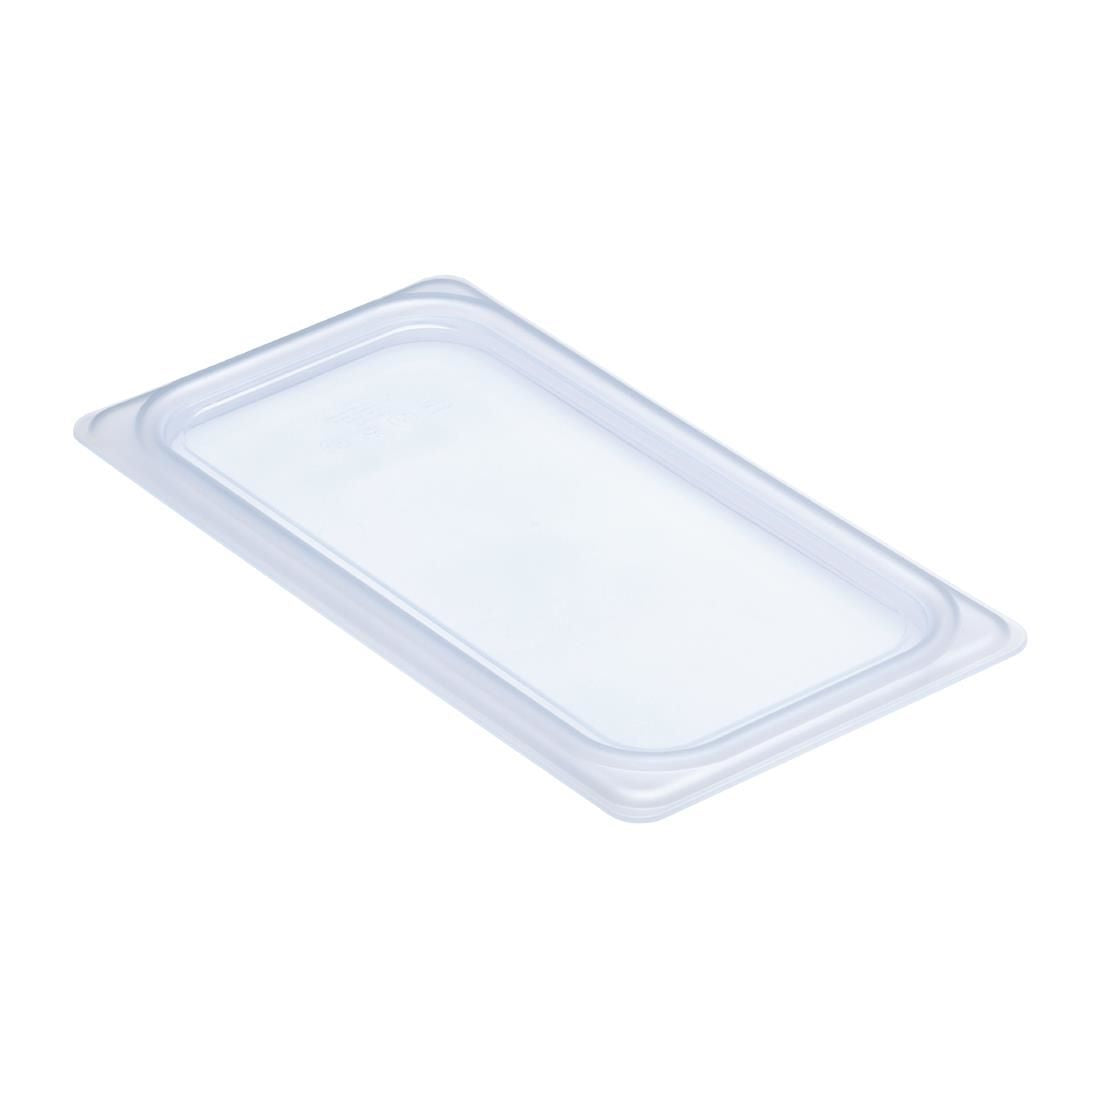 DM714 Cambro Polypropylene Gastronorm Pan 1/3 Soft Seal Lid JD Catering Equipment Solutions Ltd